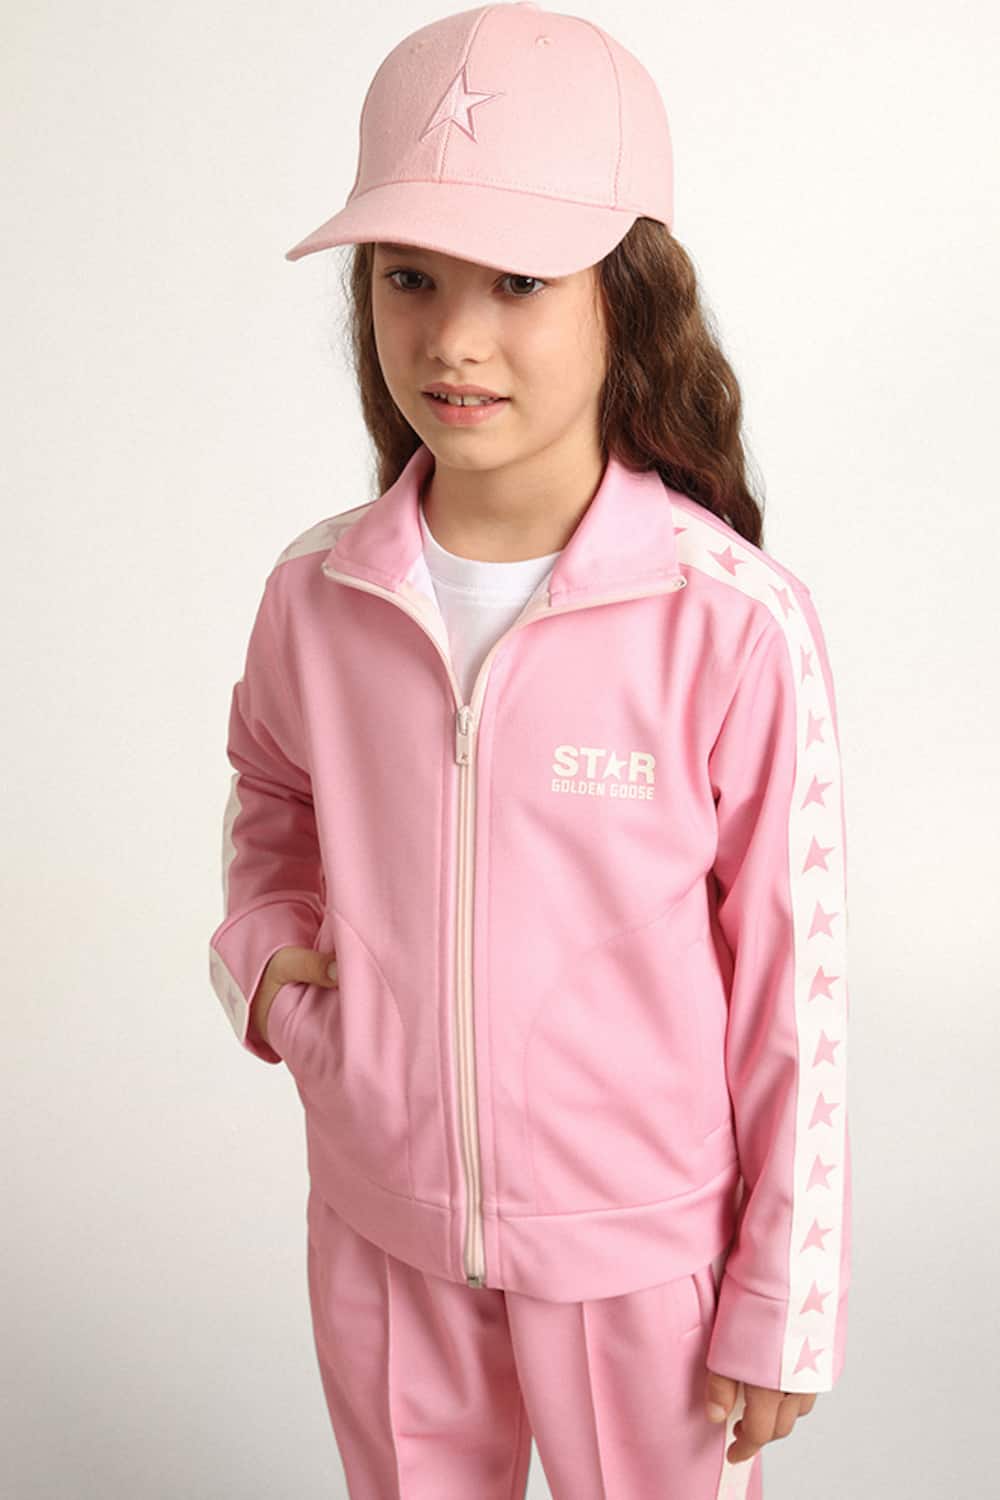 Golden Goose - Pink zipped sweatshirt with white strip and pink stars in 